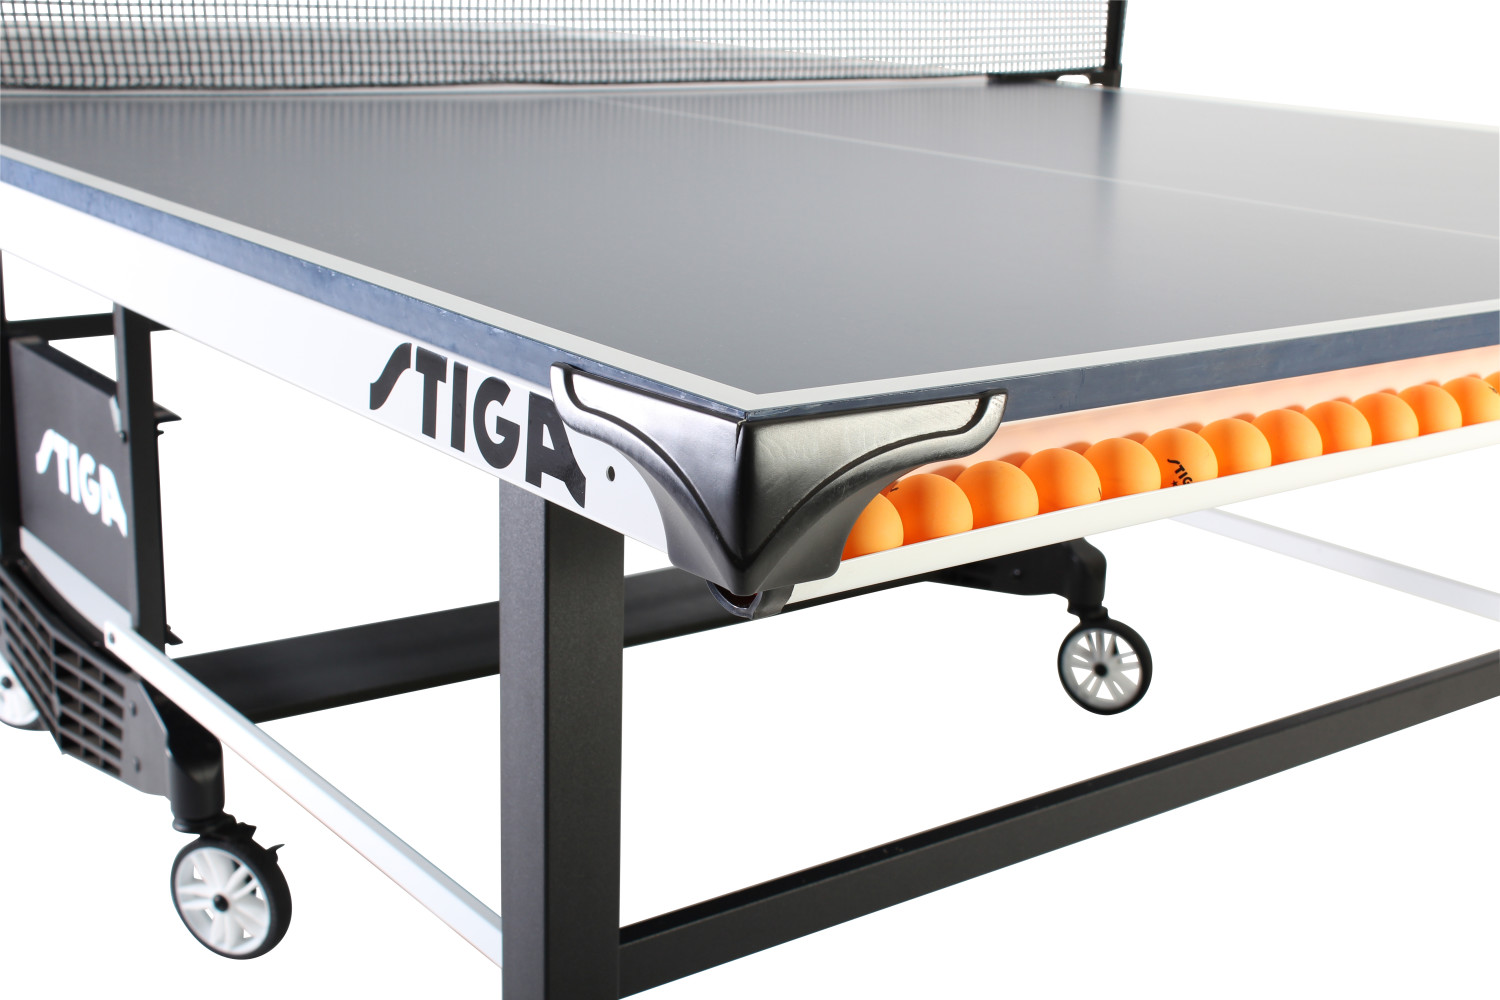 STIGA Tournament Series 385 Indoor Competition-Ready Table Tennis Table - image 2 of 8